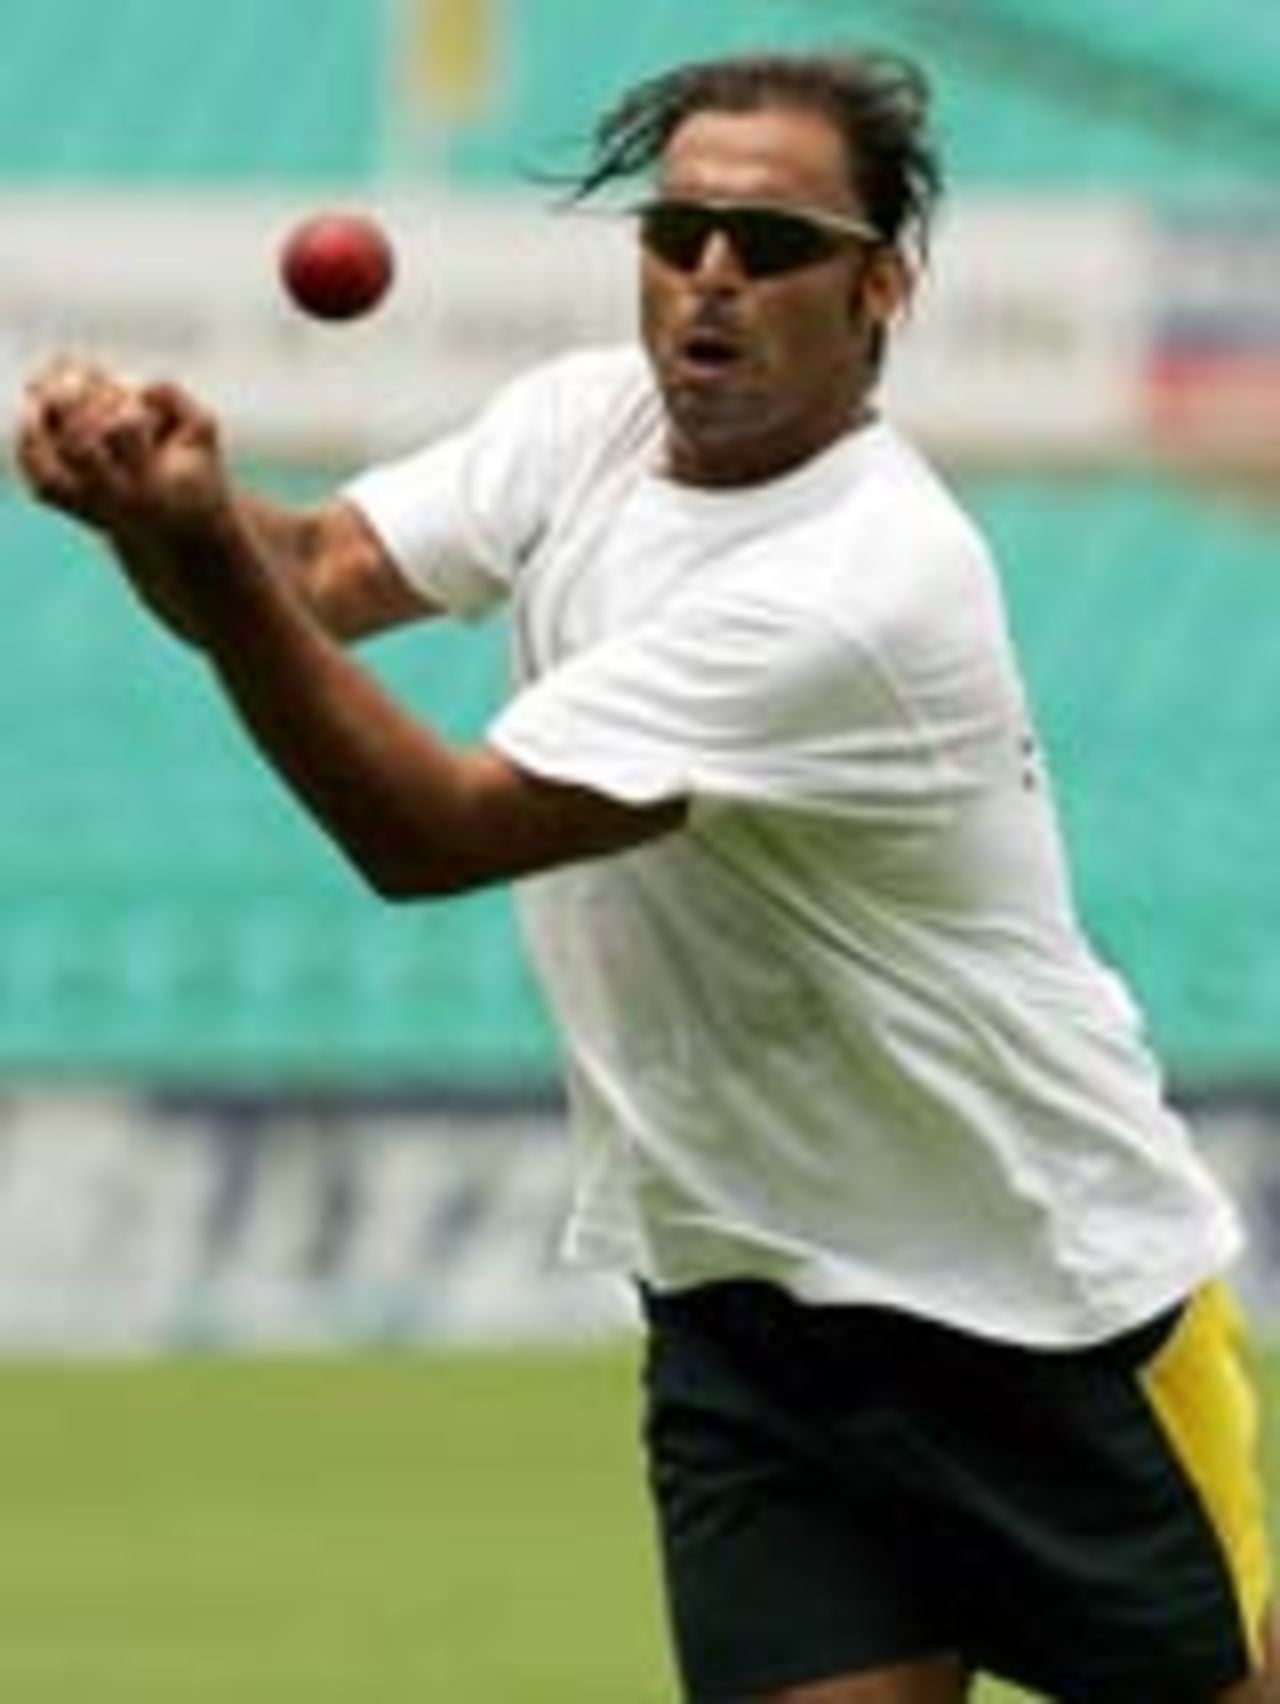 Shoaib Akhtar going for a catch in the nets, January 1, 2005